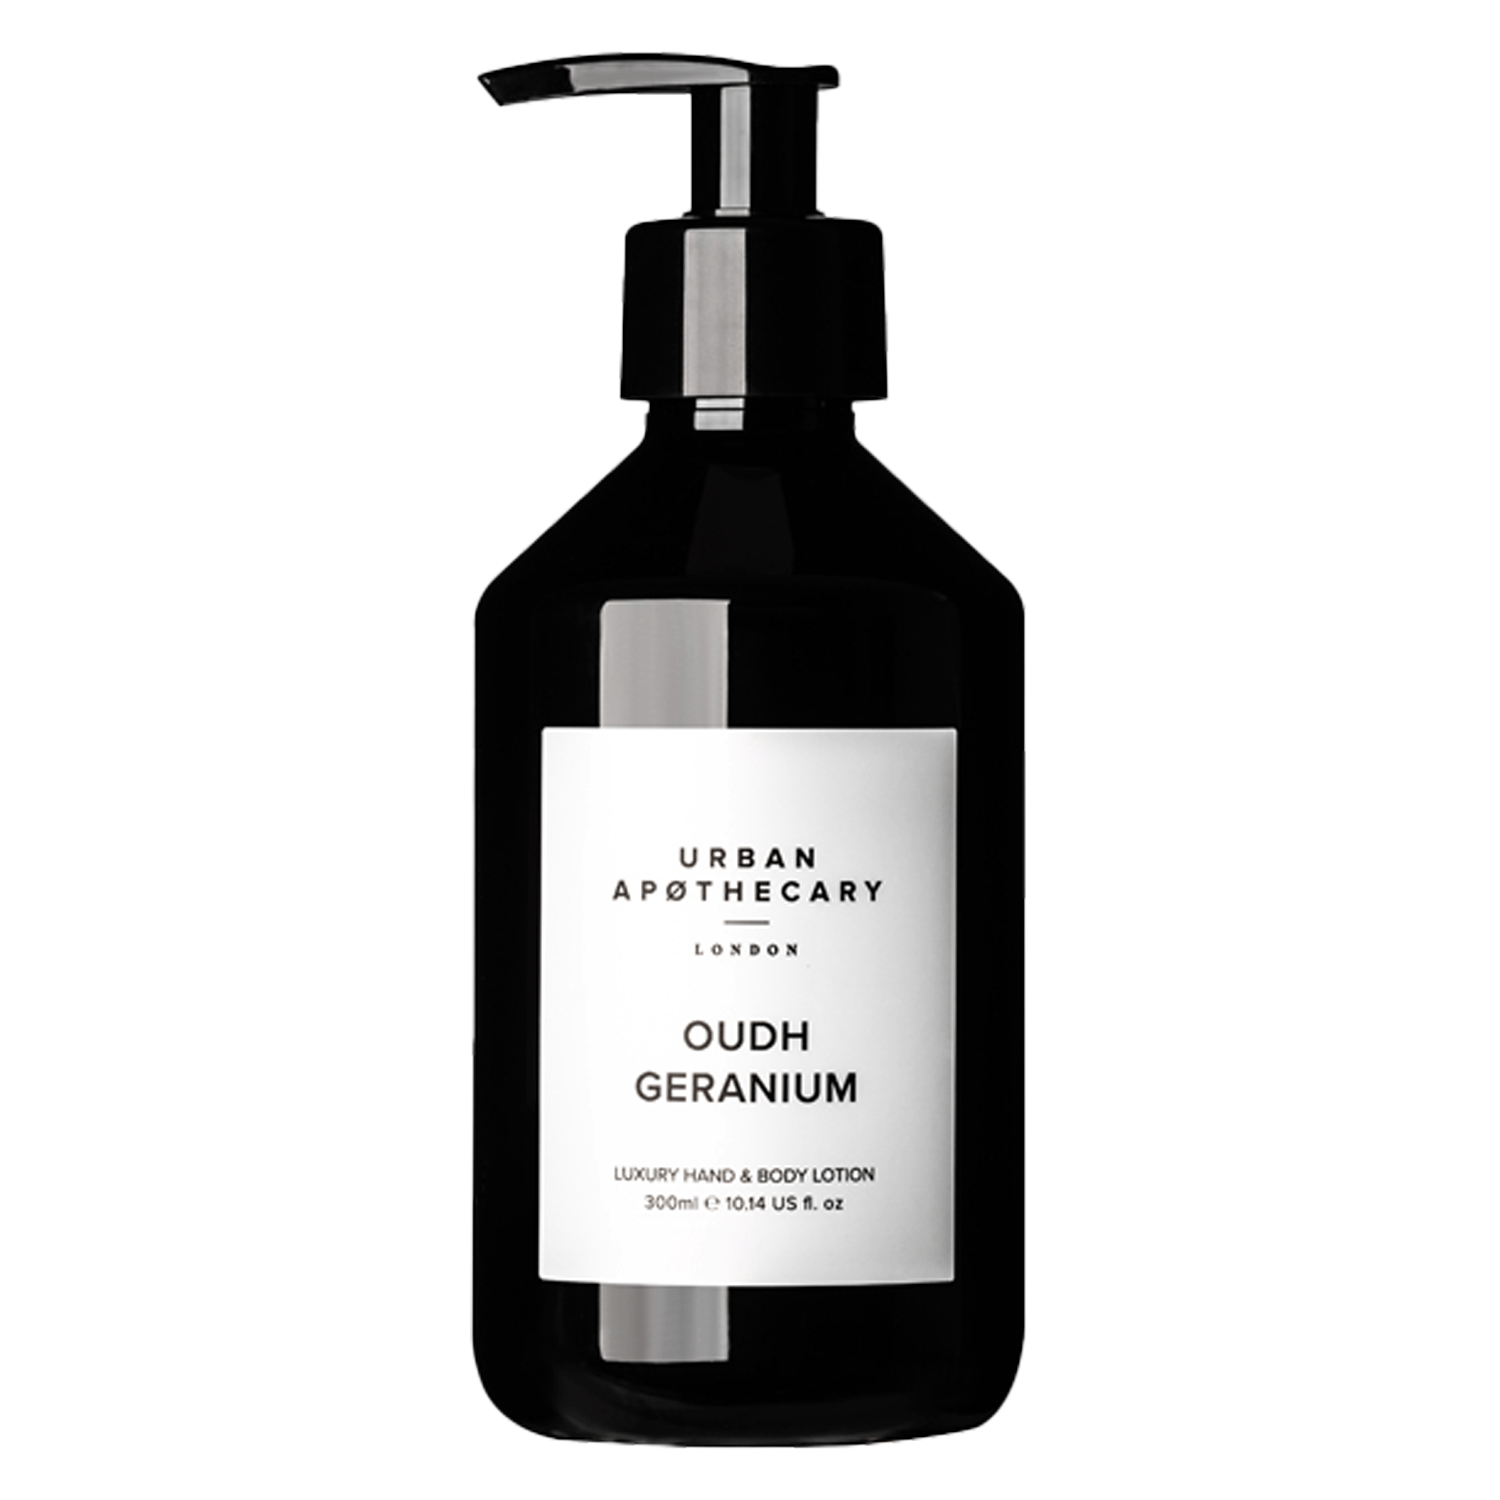 Product image from Urban Apothecary - Luxury Hand & Body Lotion Oudh Geranium